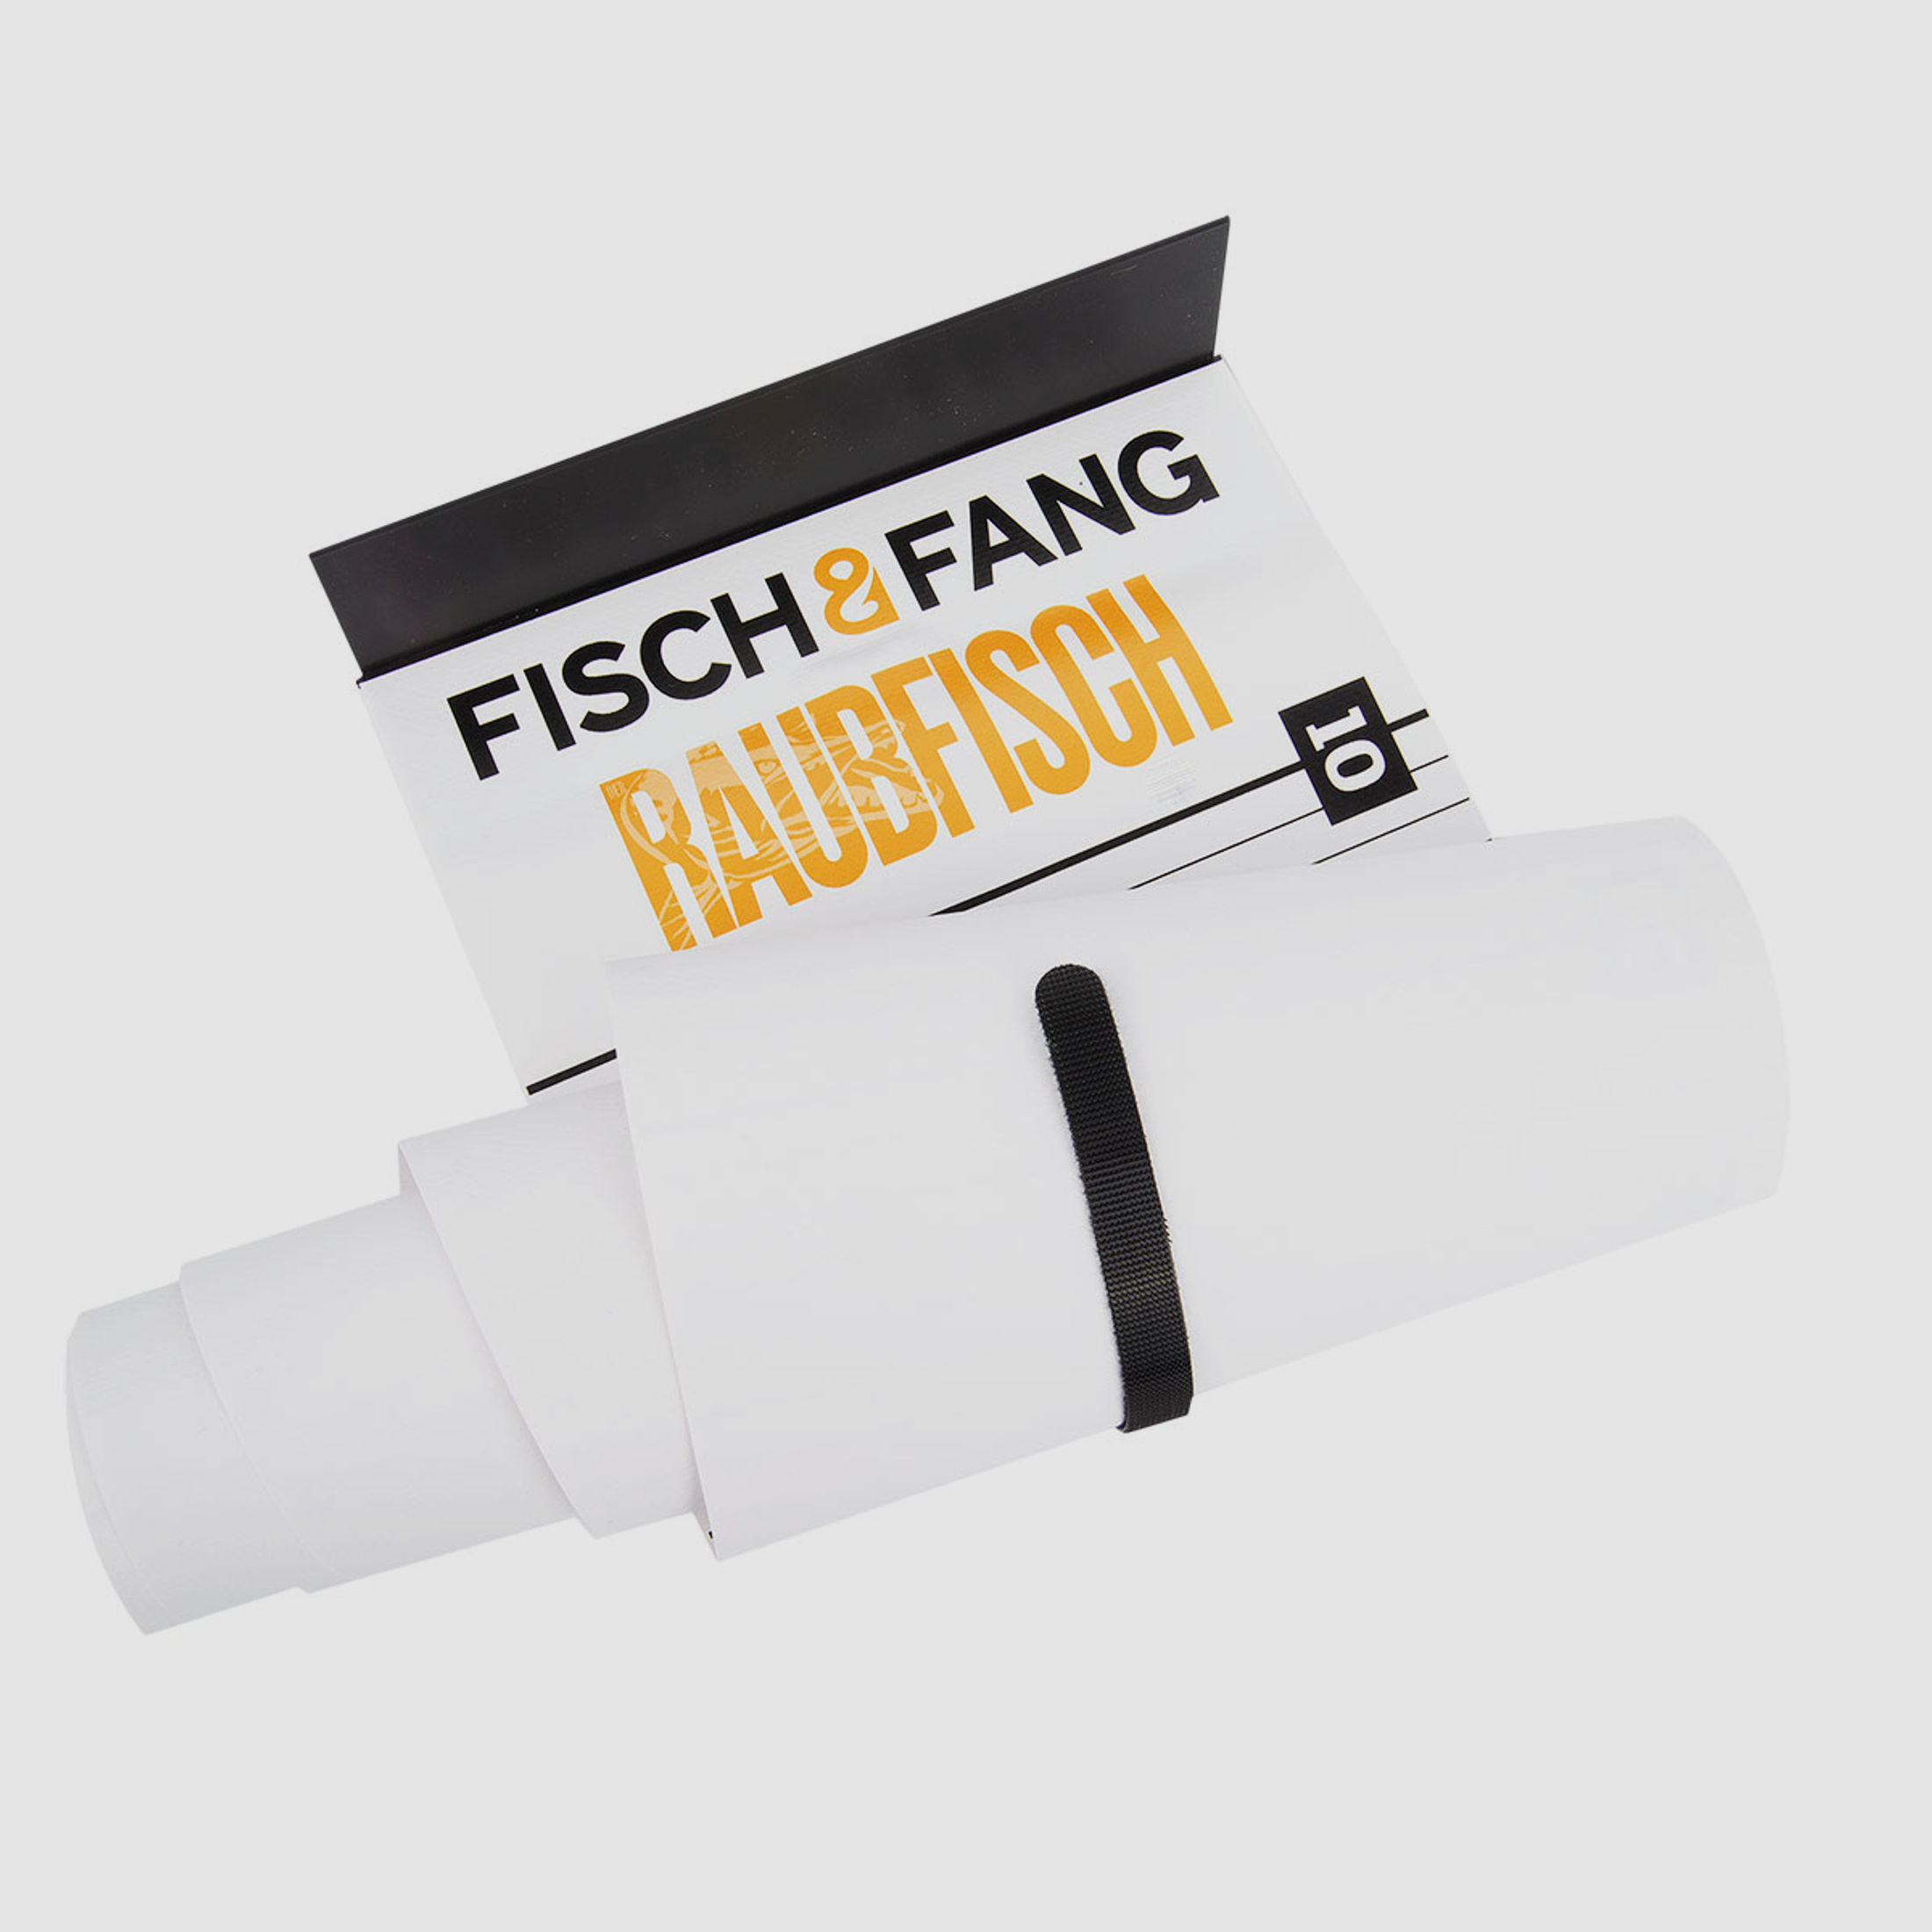 FISCH & FANG Edition: Fishscale Maßband 1,3 Meter